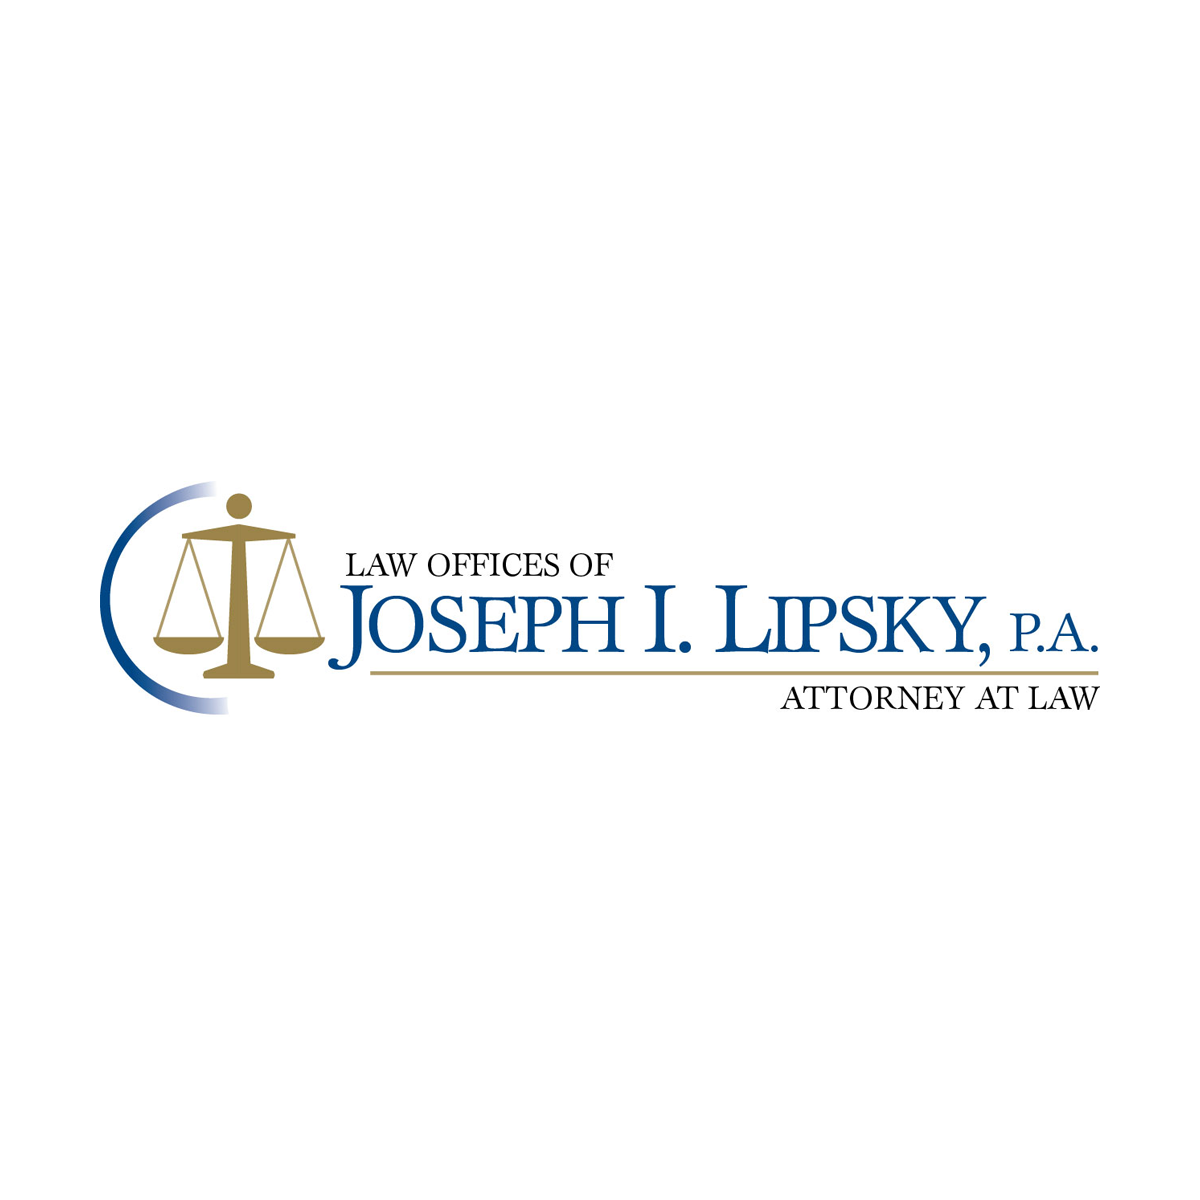 Deadly Car Accidents Rise in 2020 — Florida Personal Injury Lawyer Blog — March 22, 2021